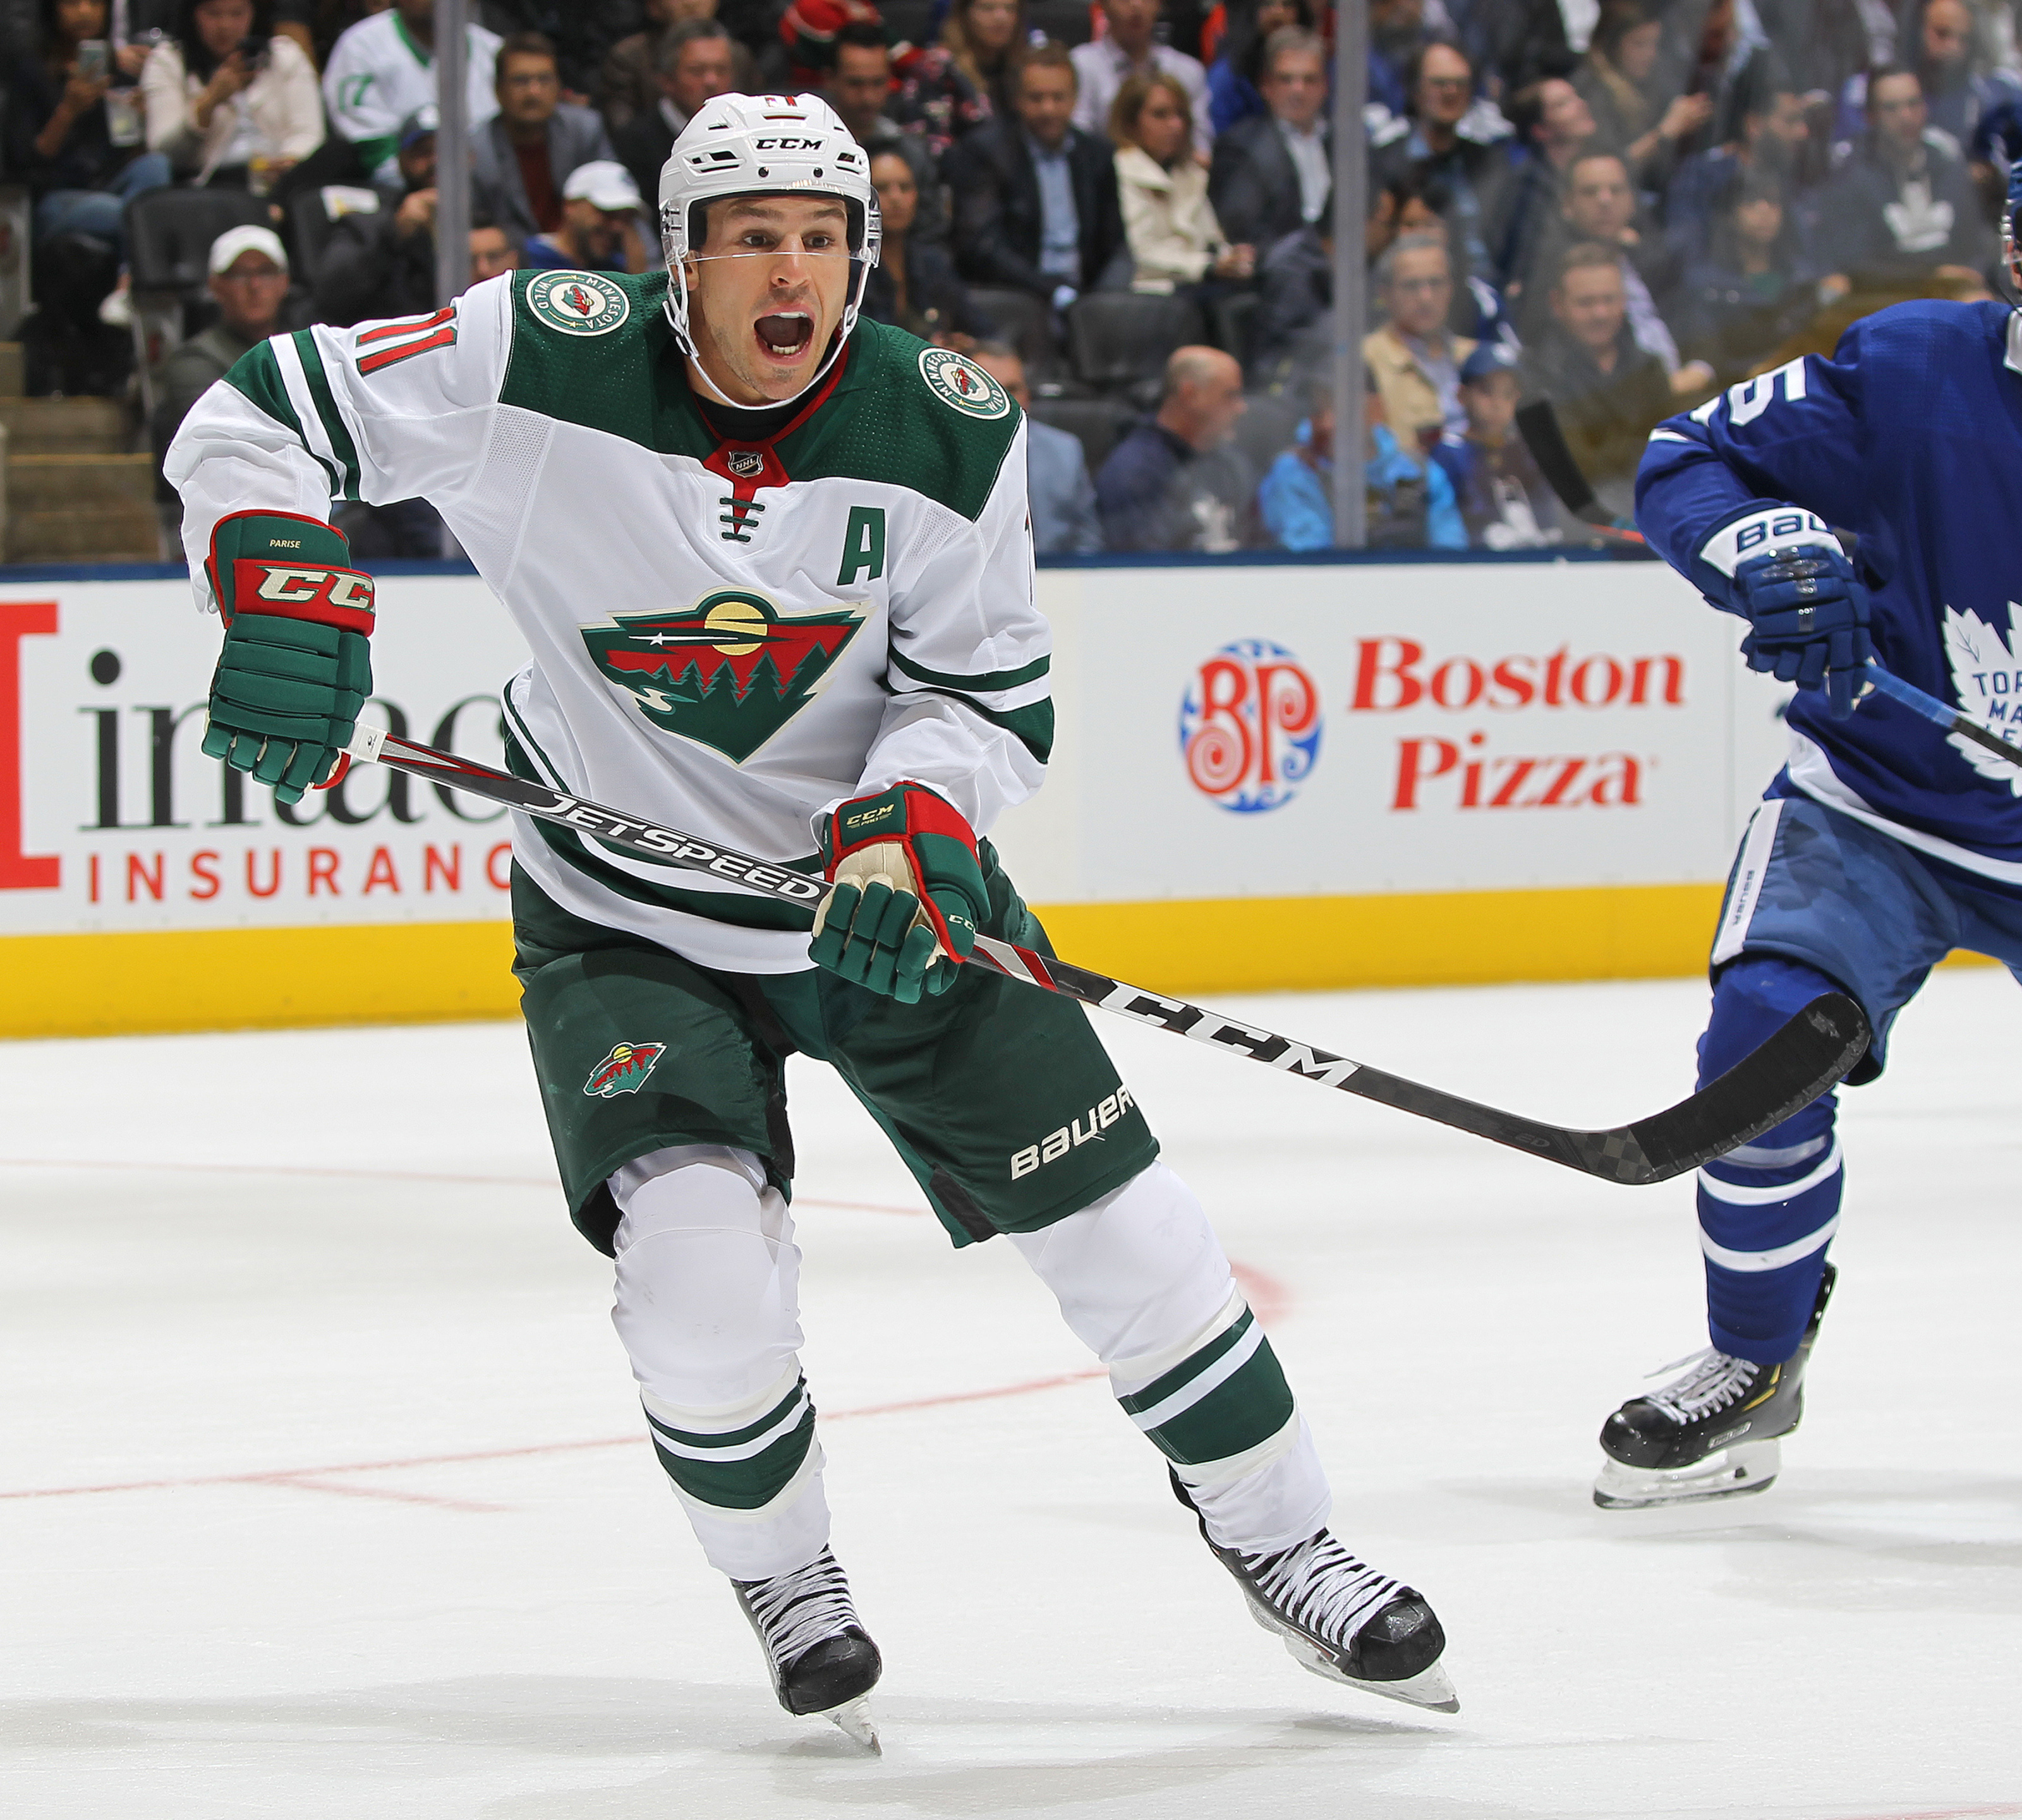 Ryan Suter on Zach Parise: As a friend, it's awful. As a team, it